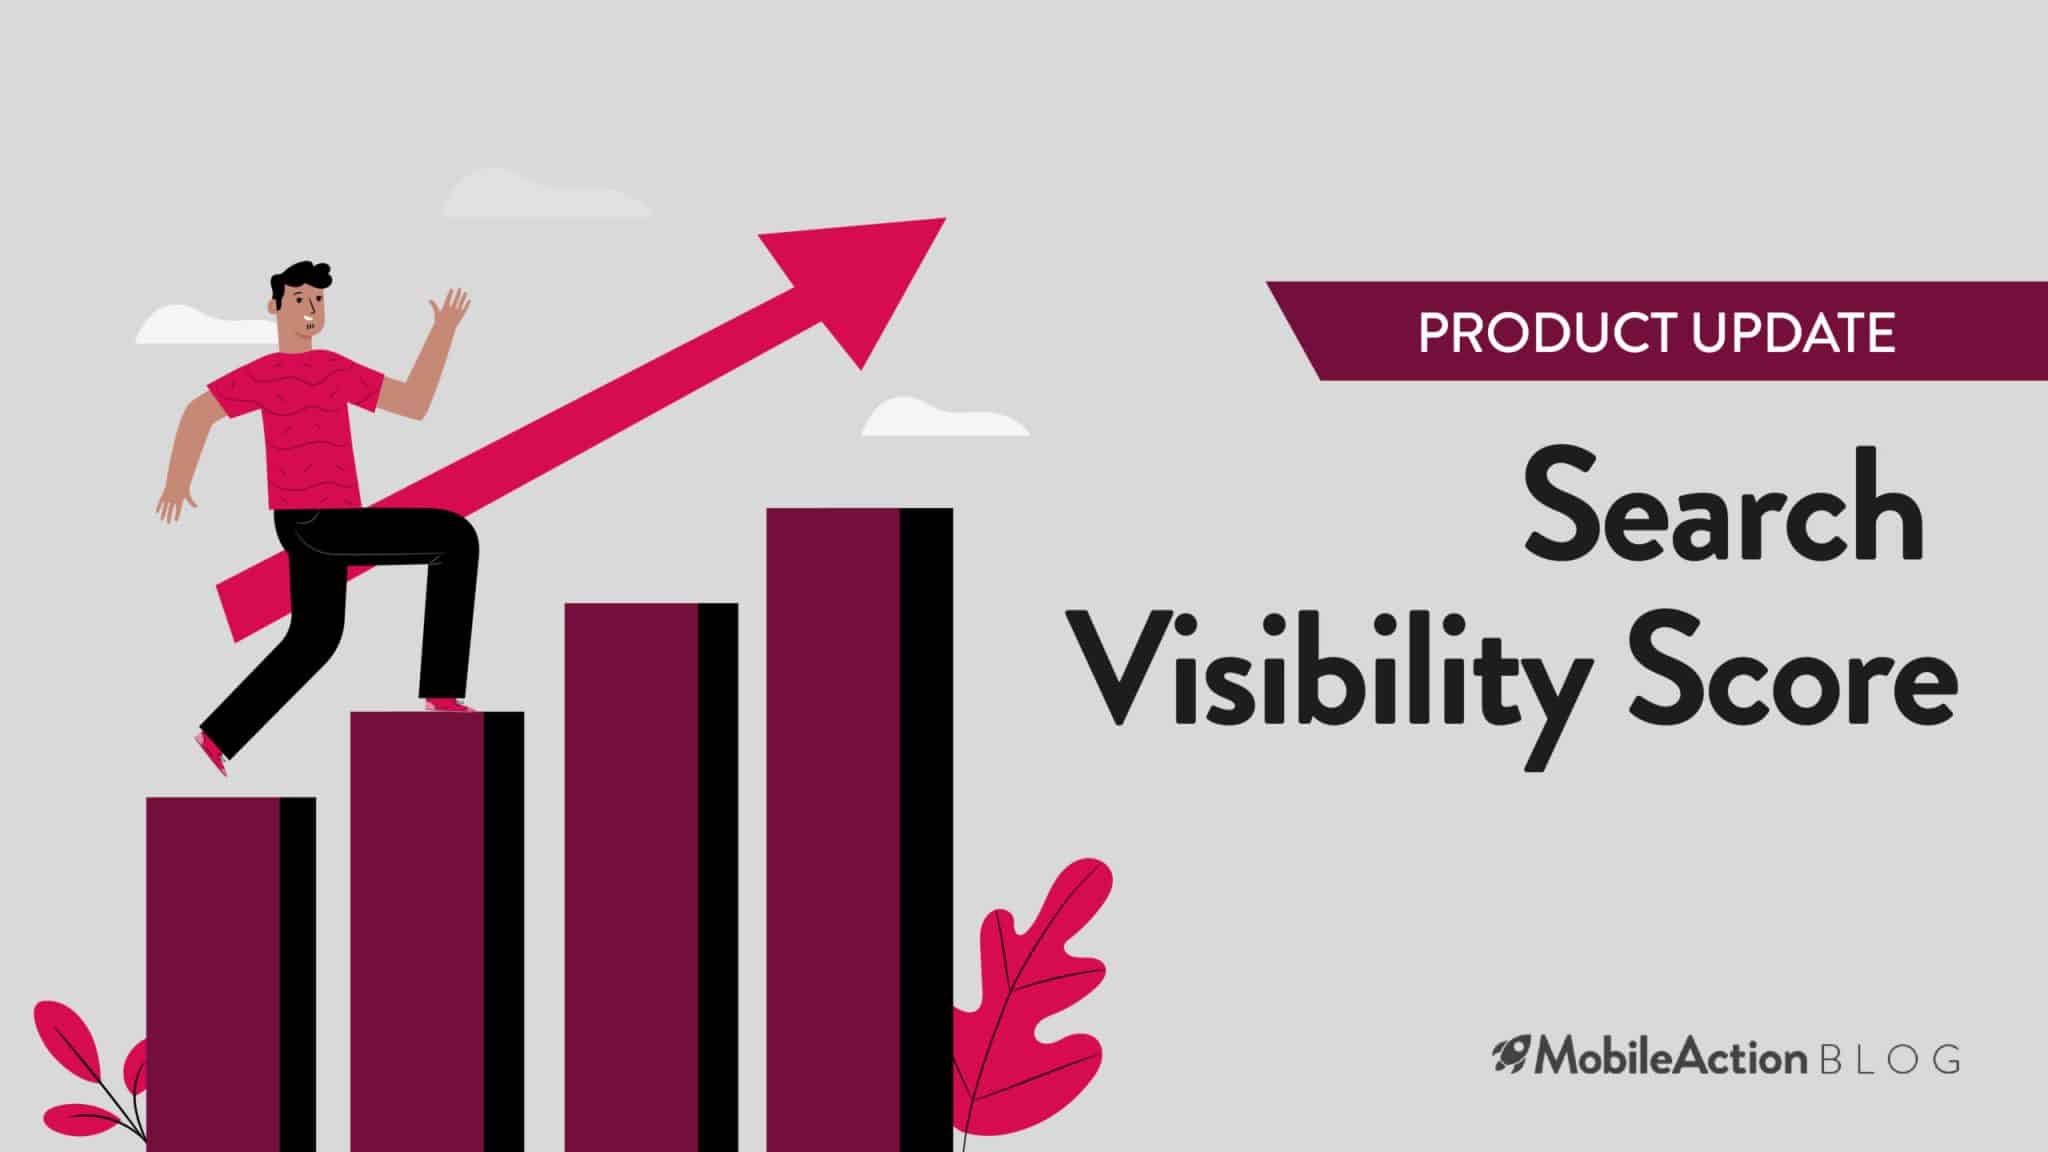 search visibility score product update